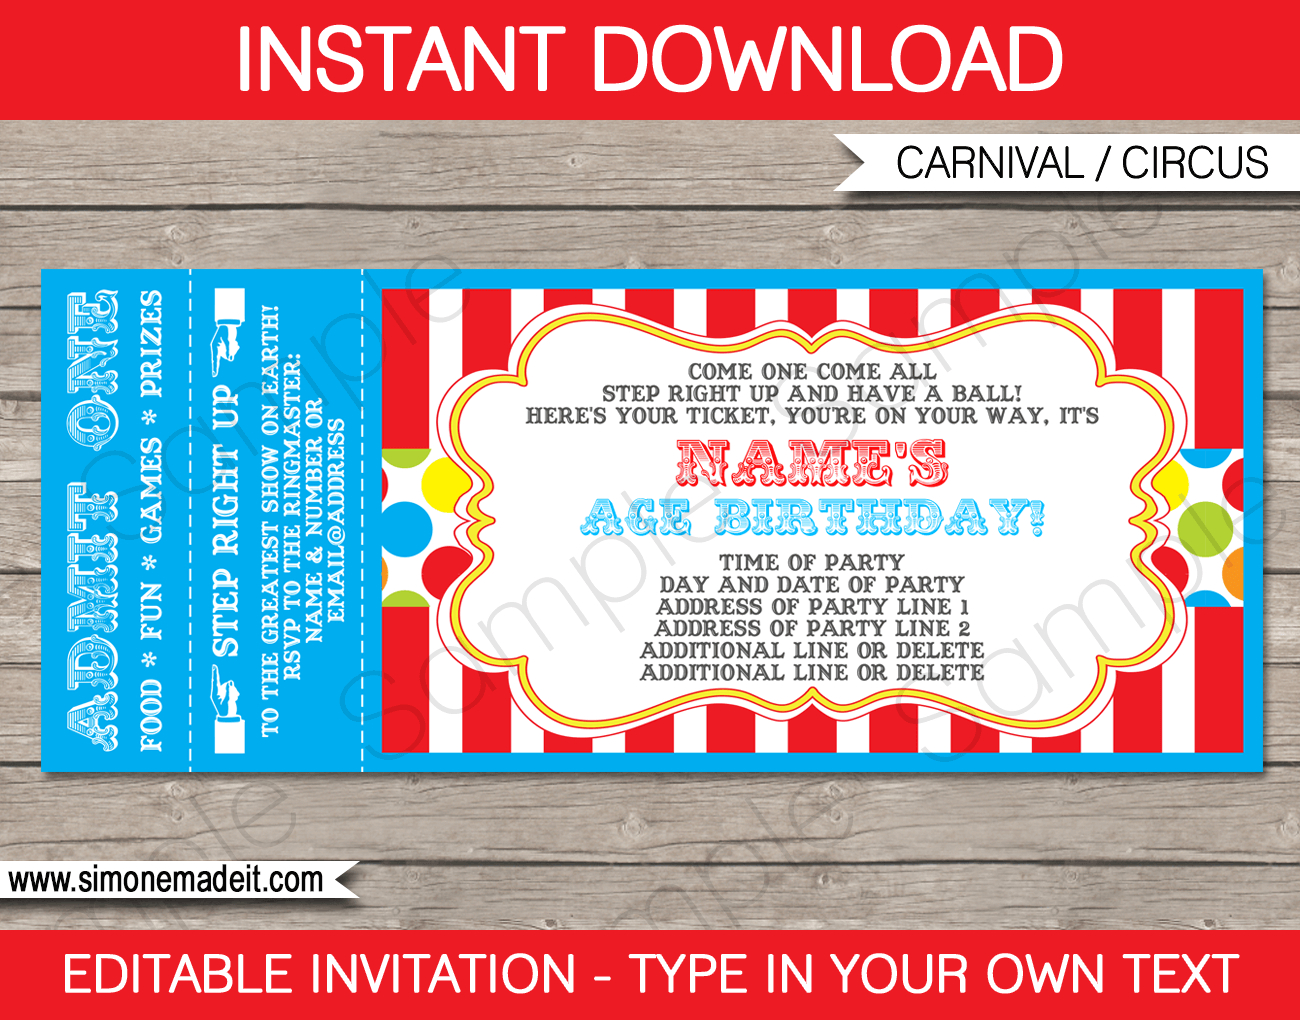 Carnival Party Ticket Invitation Template | Carnival Or Circus - Free Printable Ticket Invitation Templates